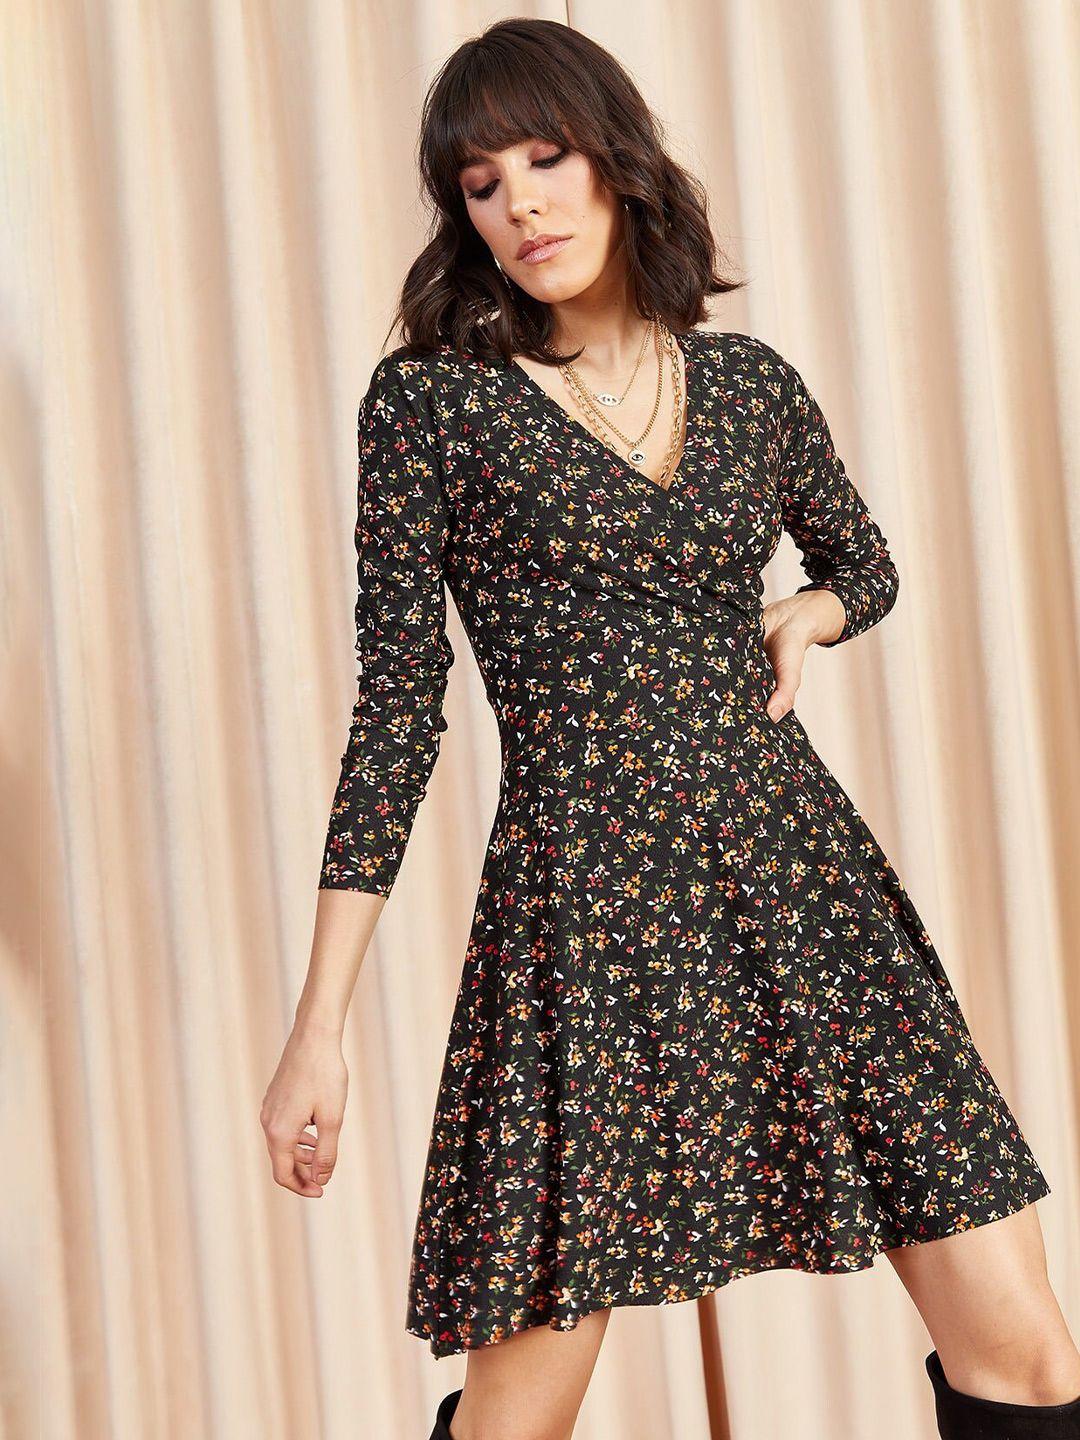 olalook floral printed v-neck gathered fit & flare dress